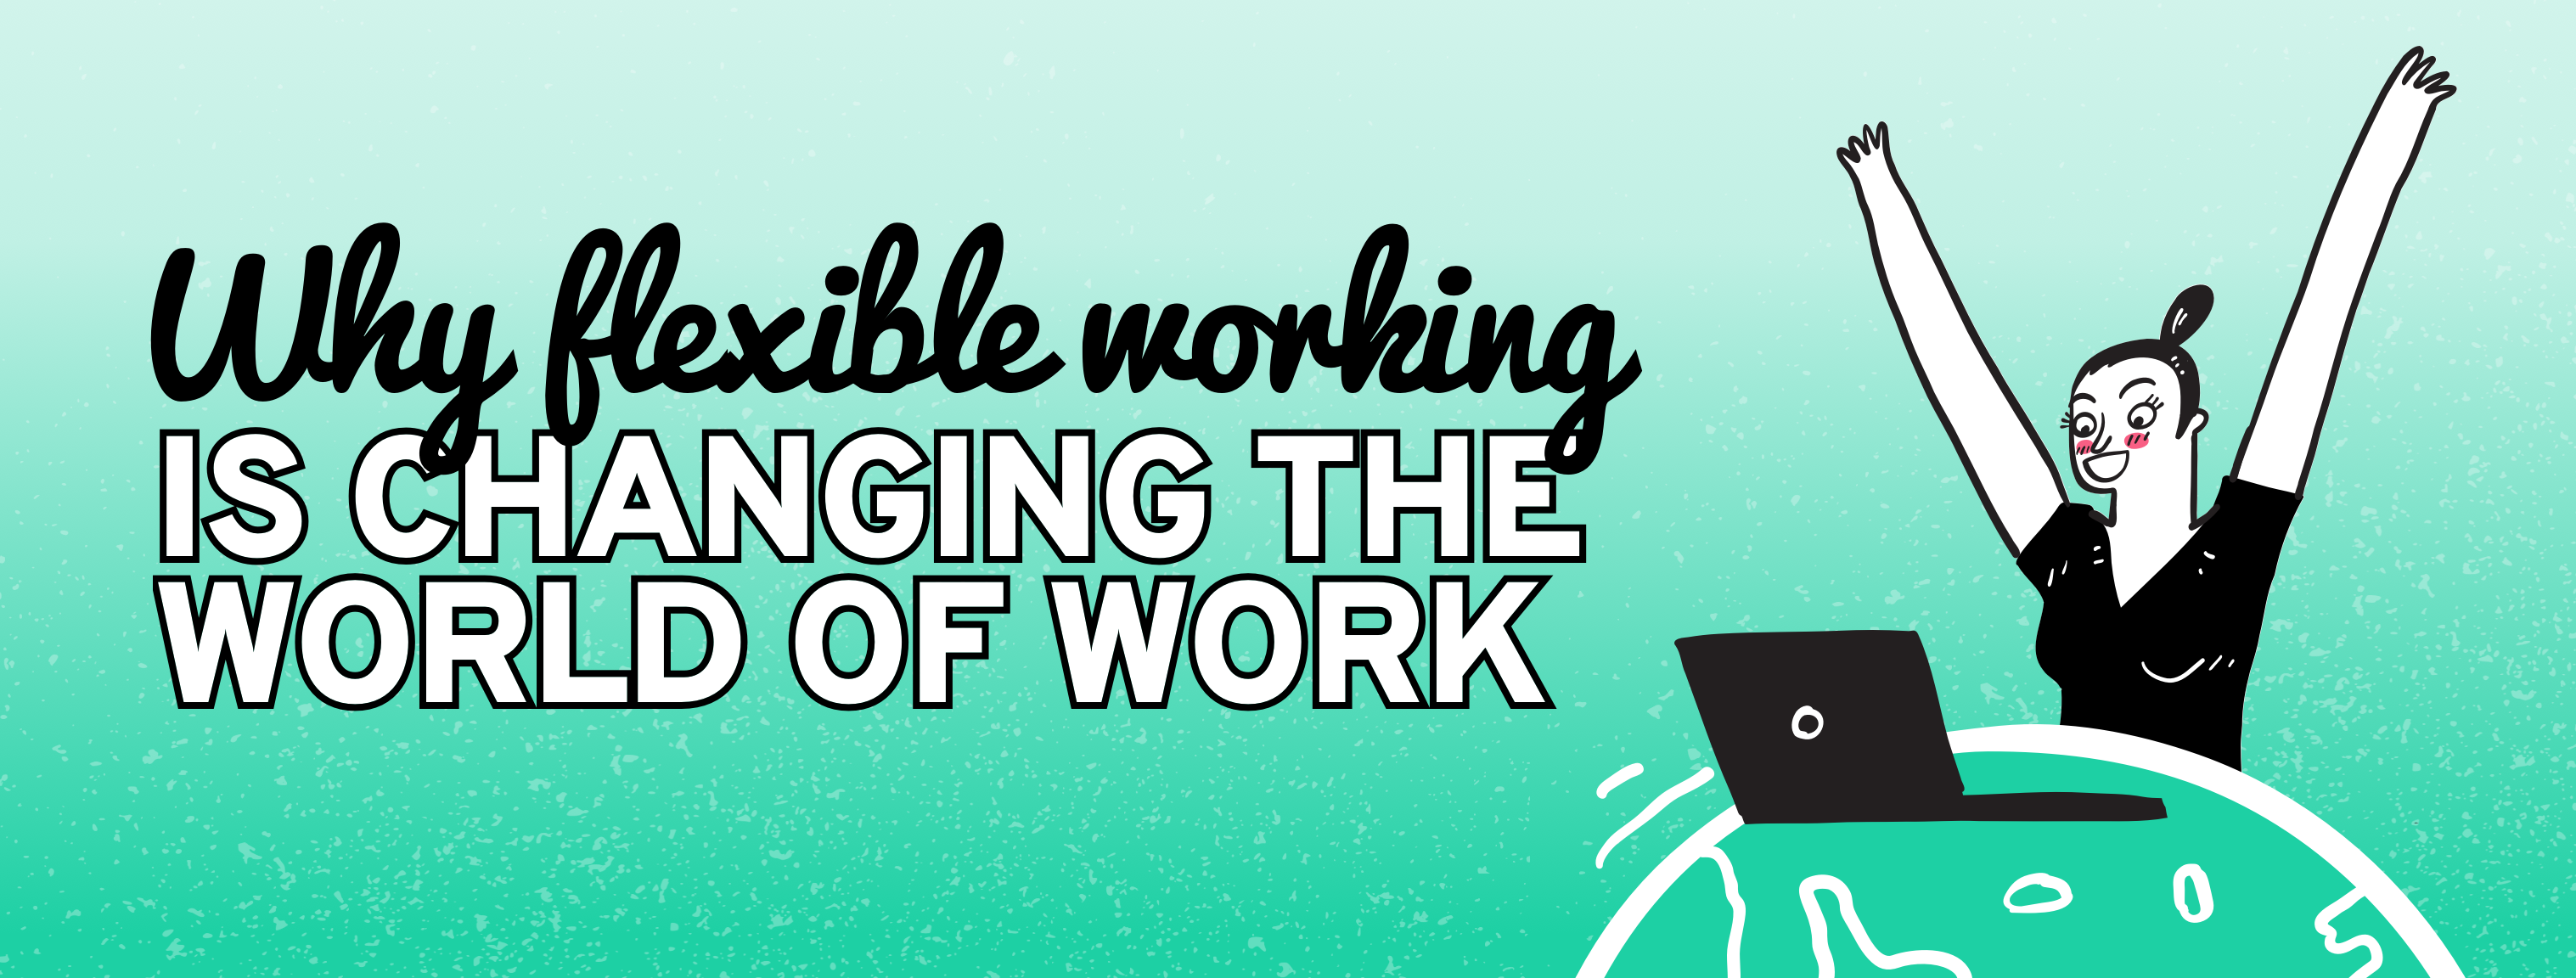 why-flexible-working-is-changing-the-world-of-work